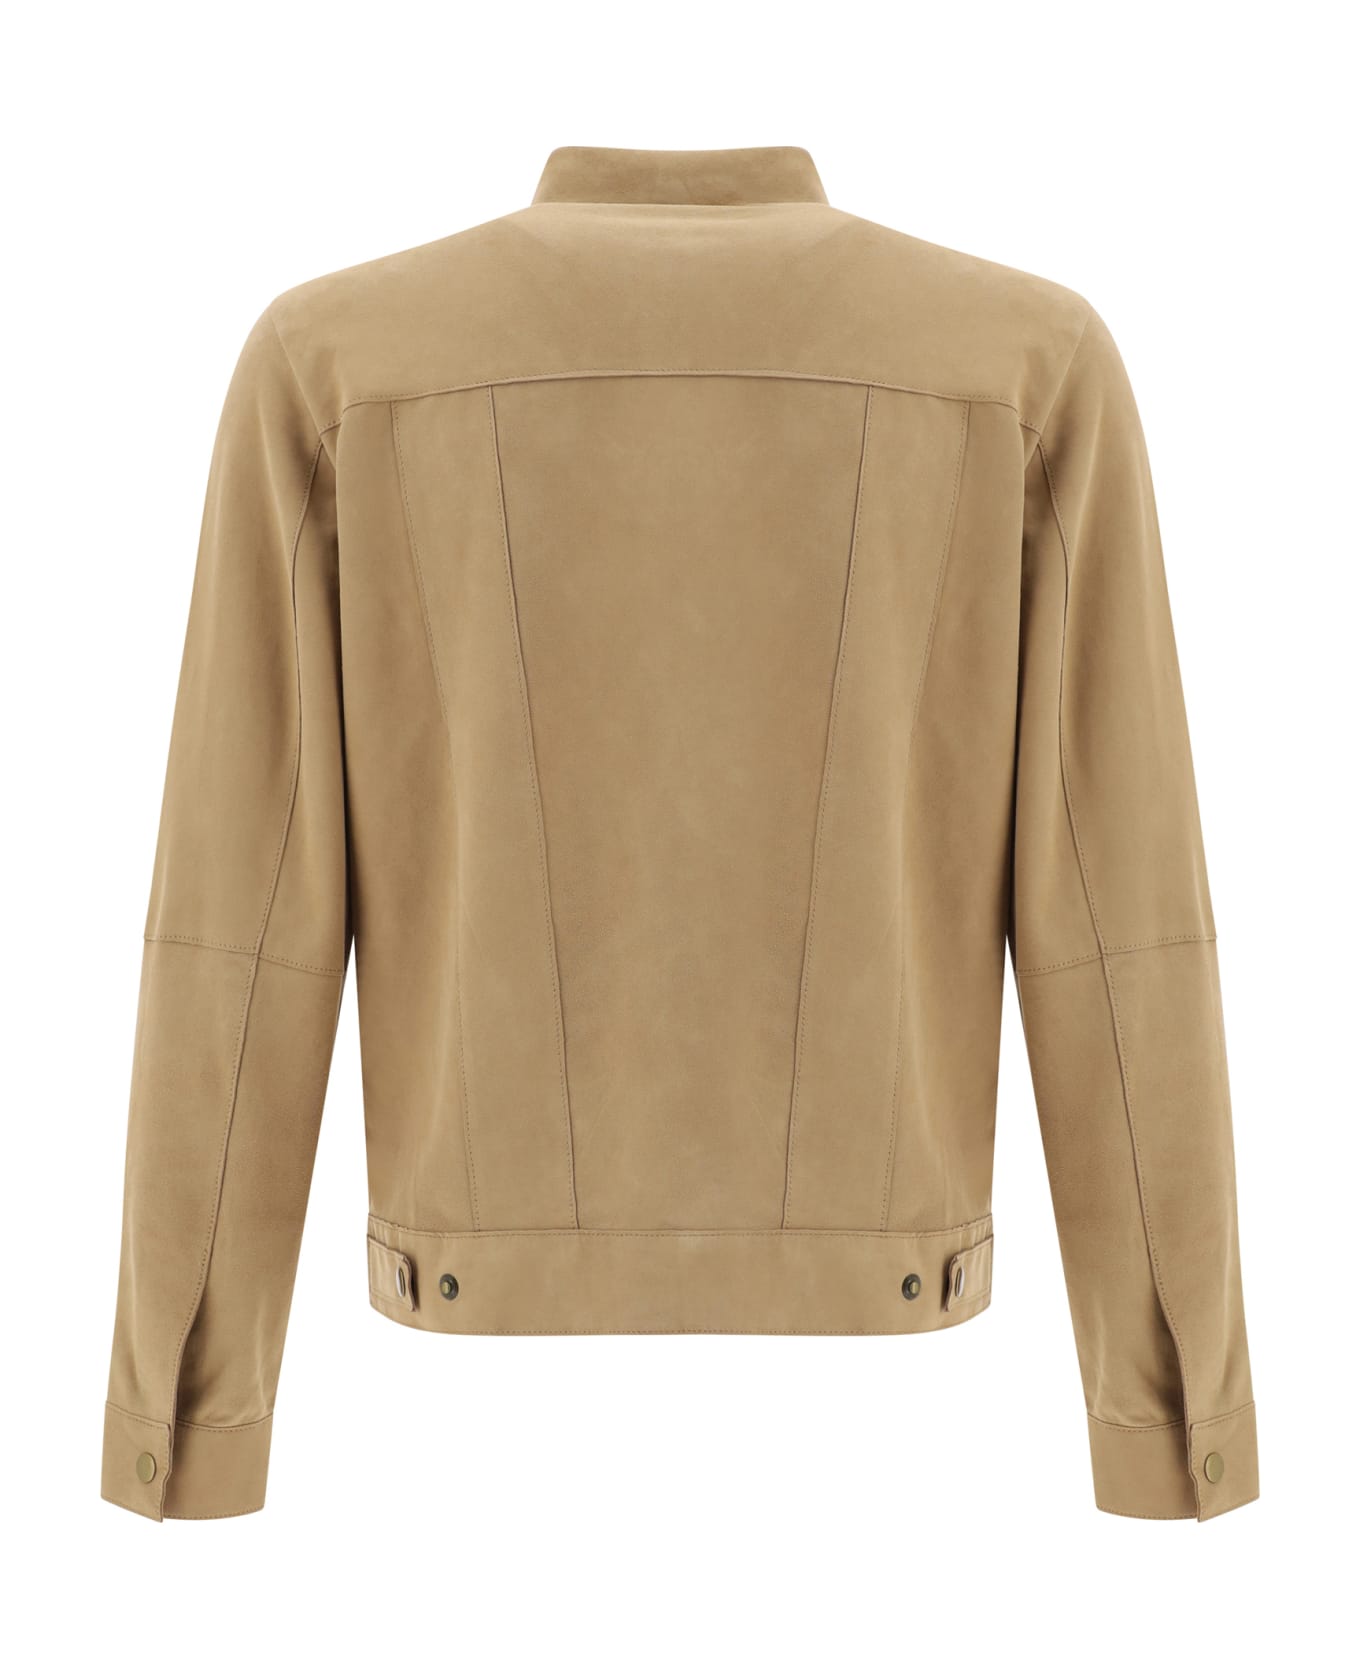 D'Amico Leather Jacket - Suede Beach Beige